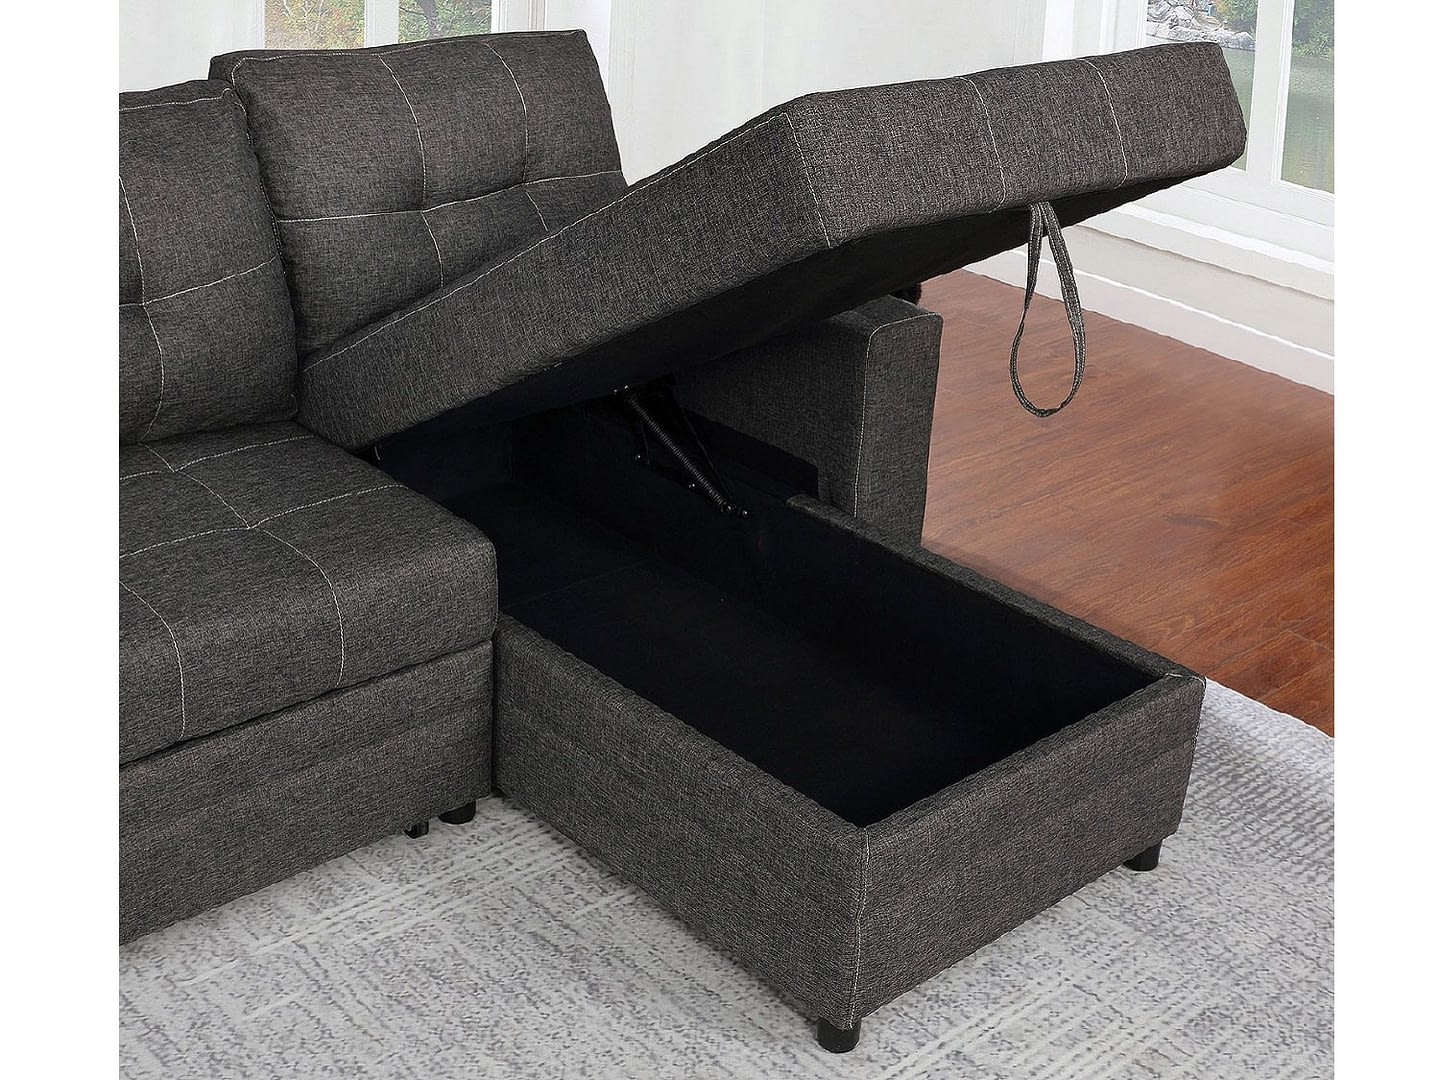 SUMNER Sleeper Sectional - Chaise Storage